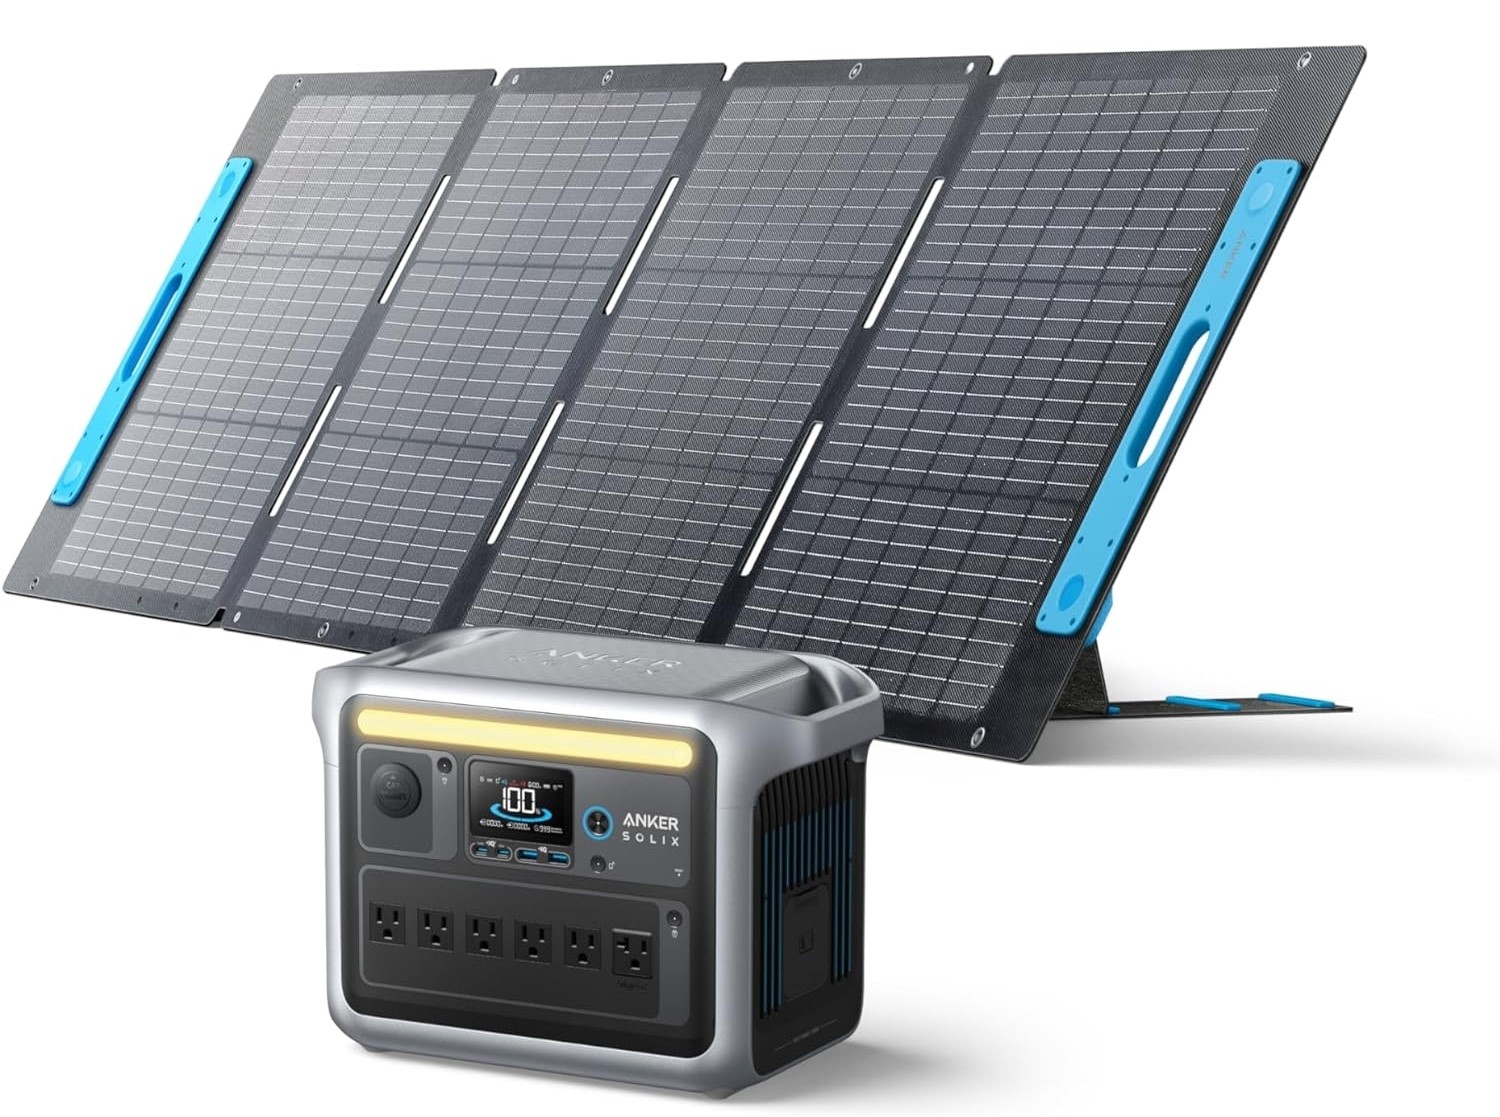 Solar panel and portable power station